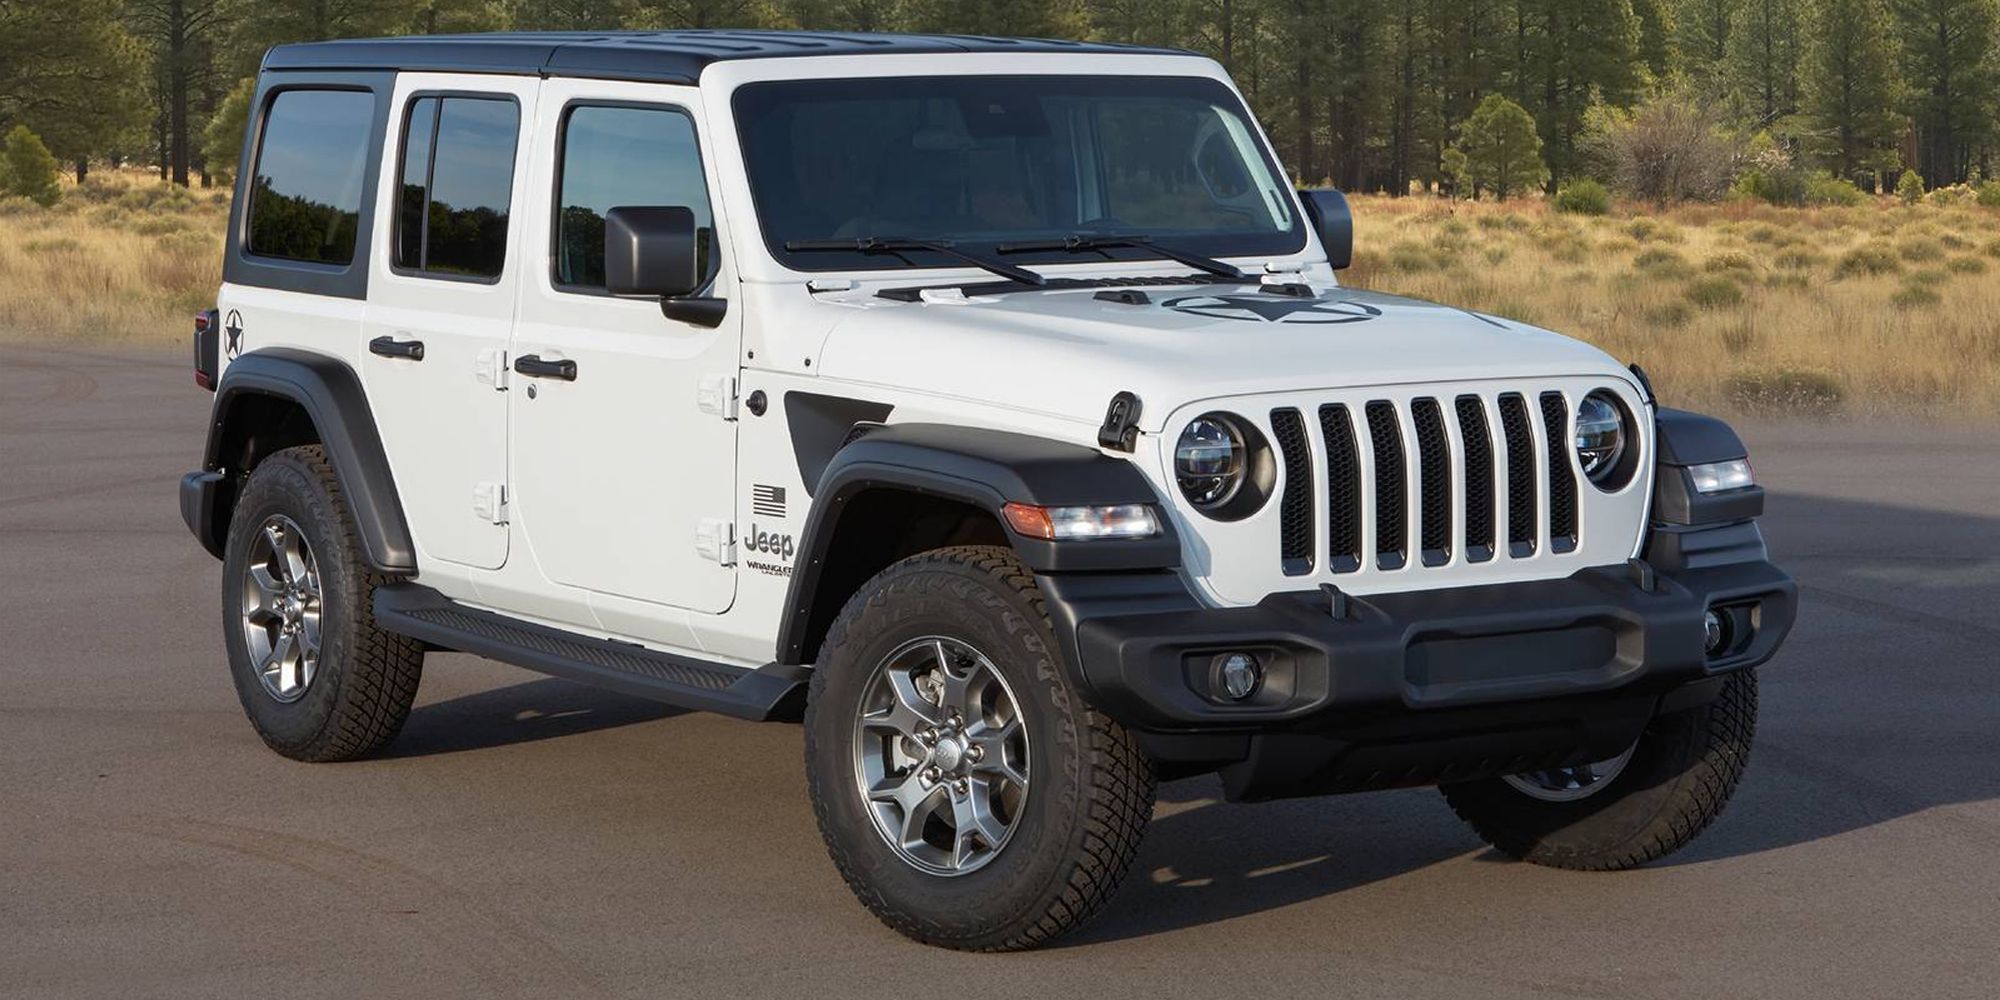 A white Wrangler Unlimited